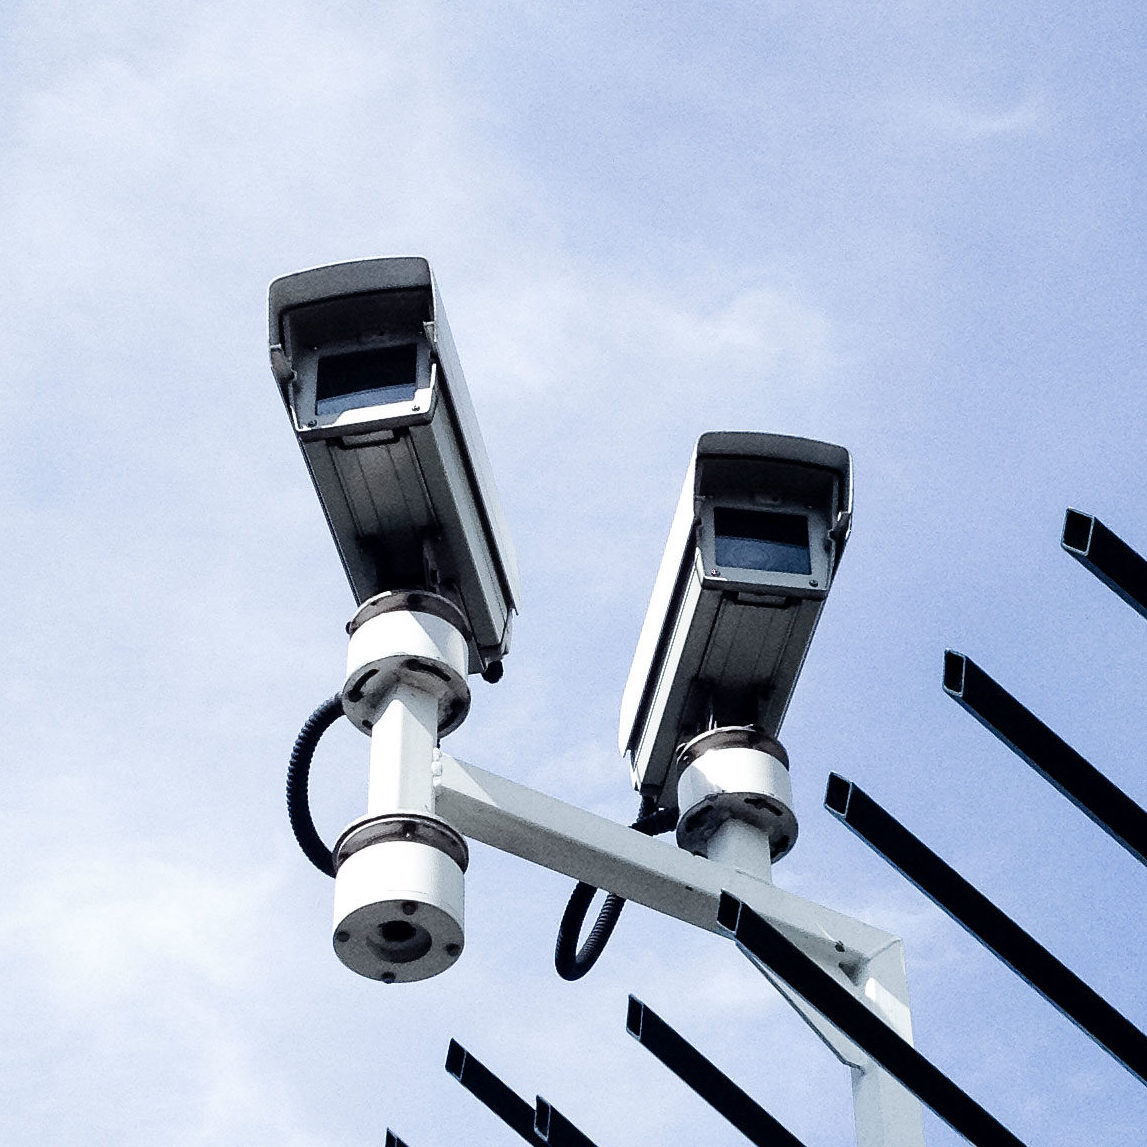 Two cctv cameras mounted on a fence with blue sky